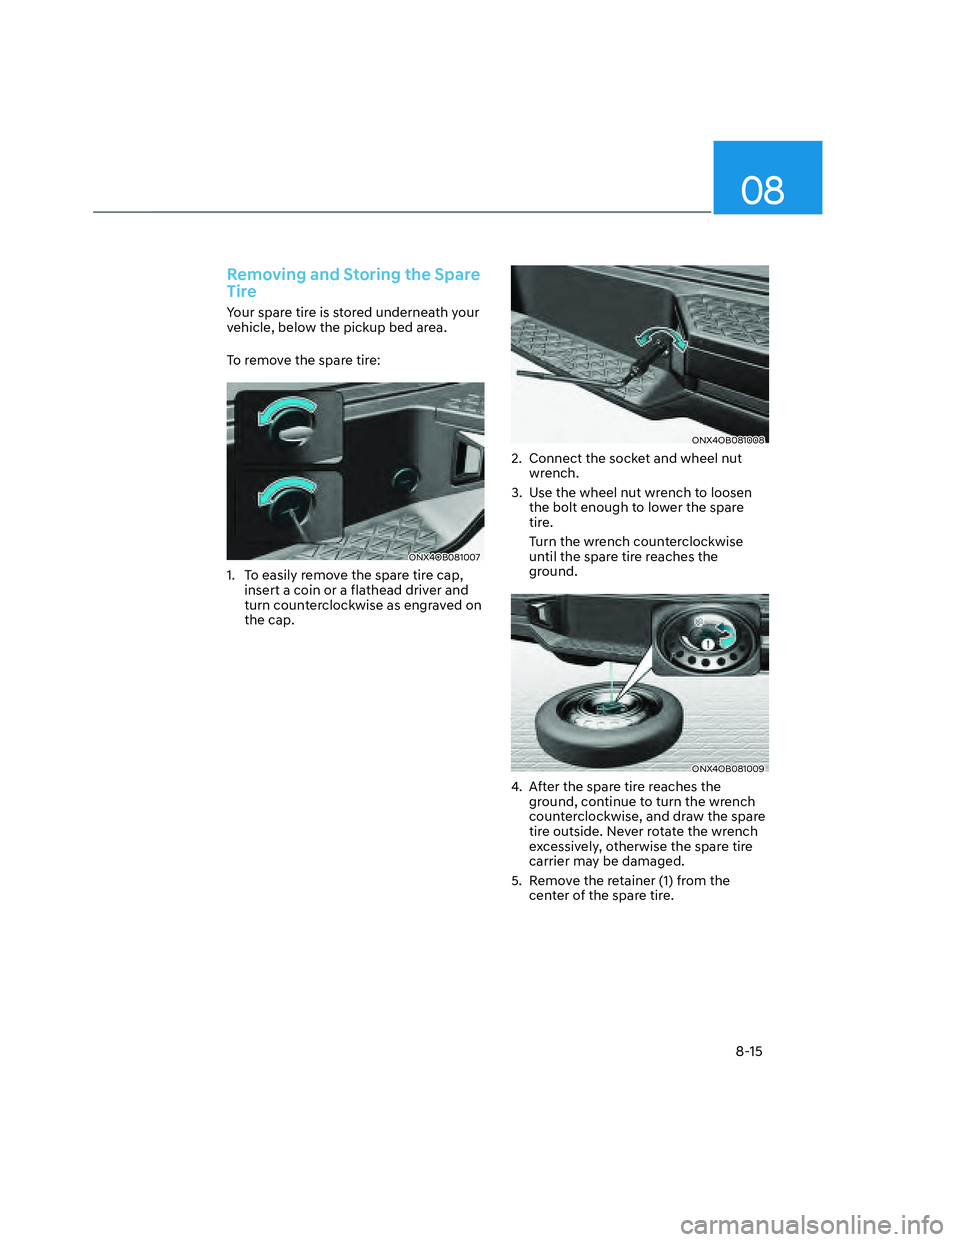 HYUNDAI SANTA CRUZ 2022  Owners Manual 08
8-15
Removing and Storing the Spare 
Tire
Your spare tire is stored underneath your 
vehicle, below the pickup bed area.
To remove the spare tire:
ONX4OB081007ONX4OB081007
1.  To easily remove the 